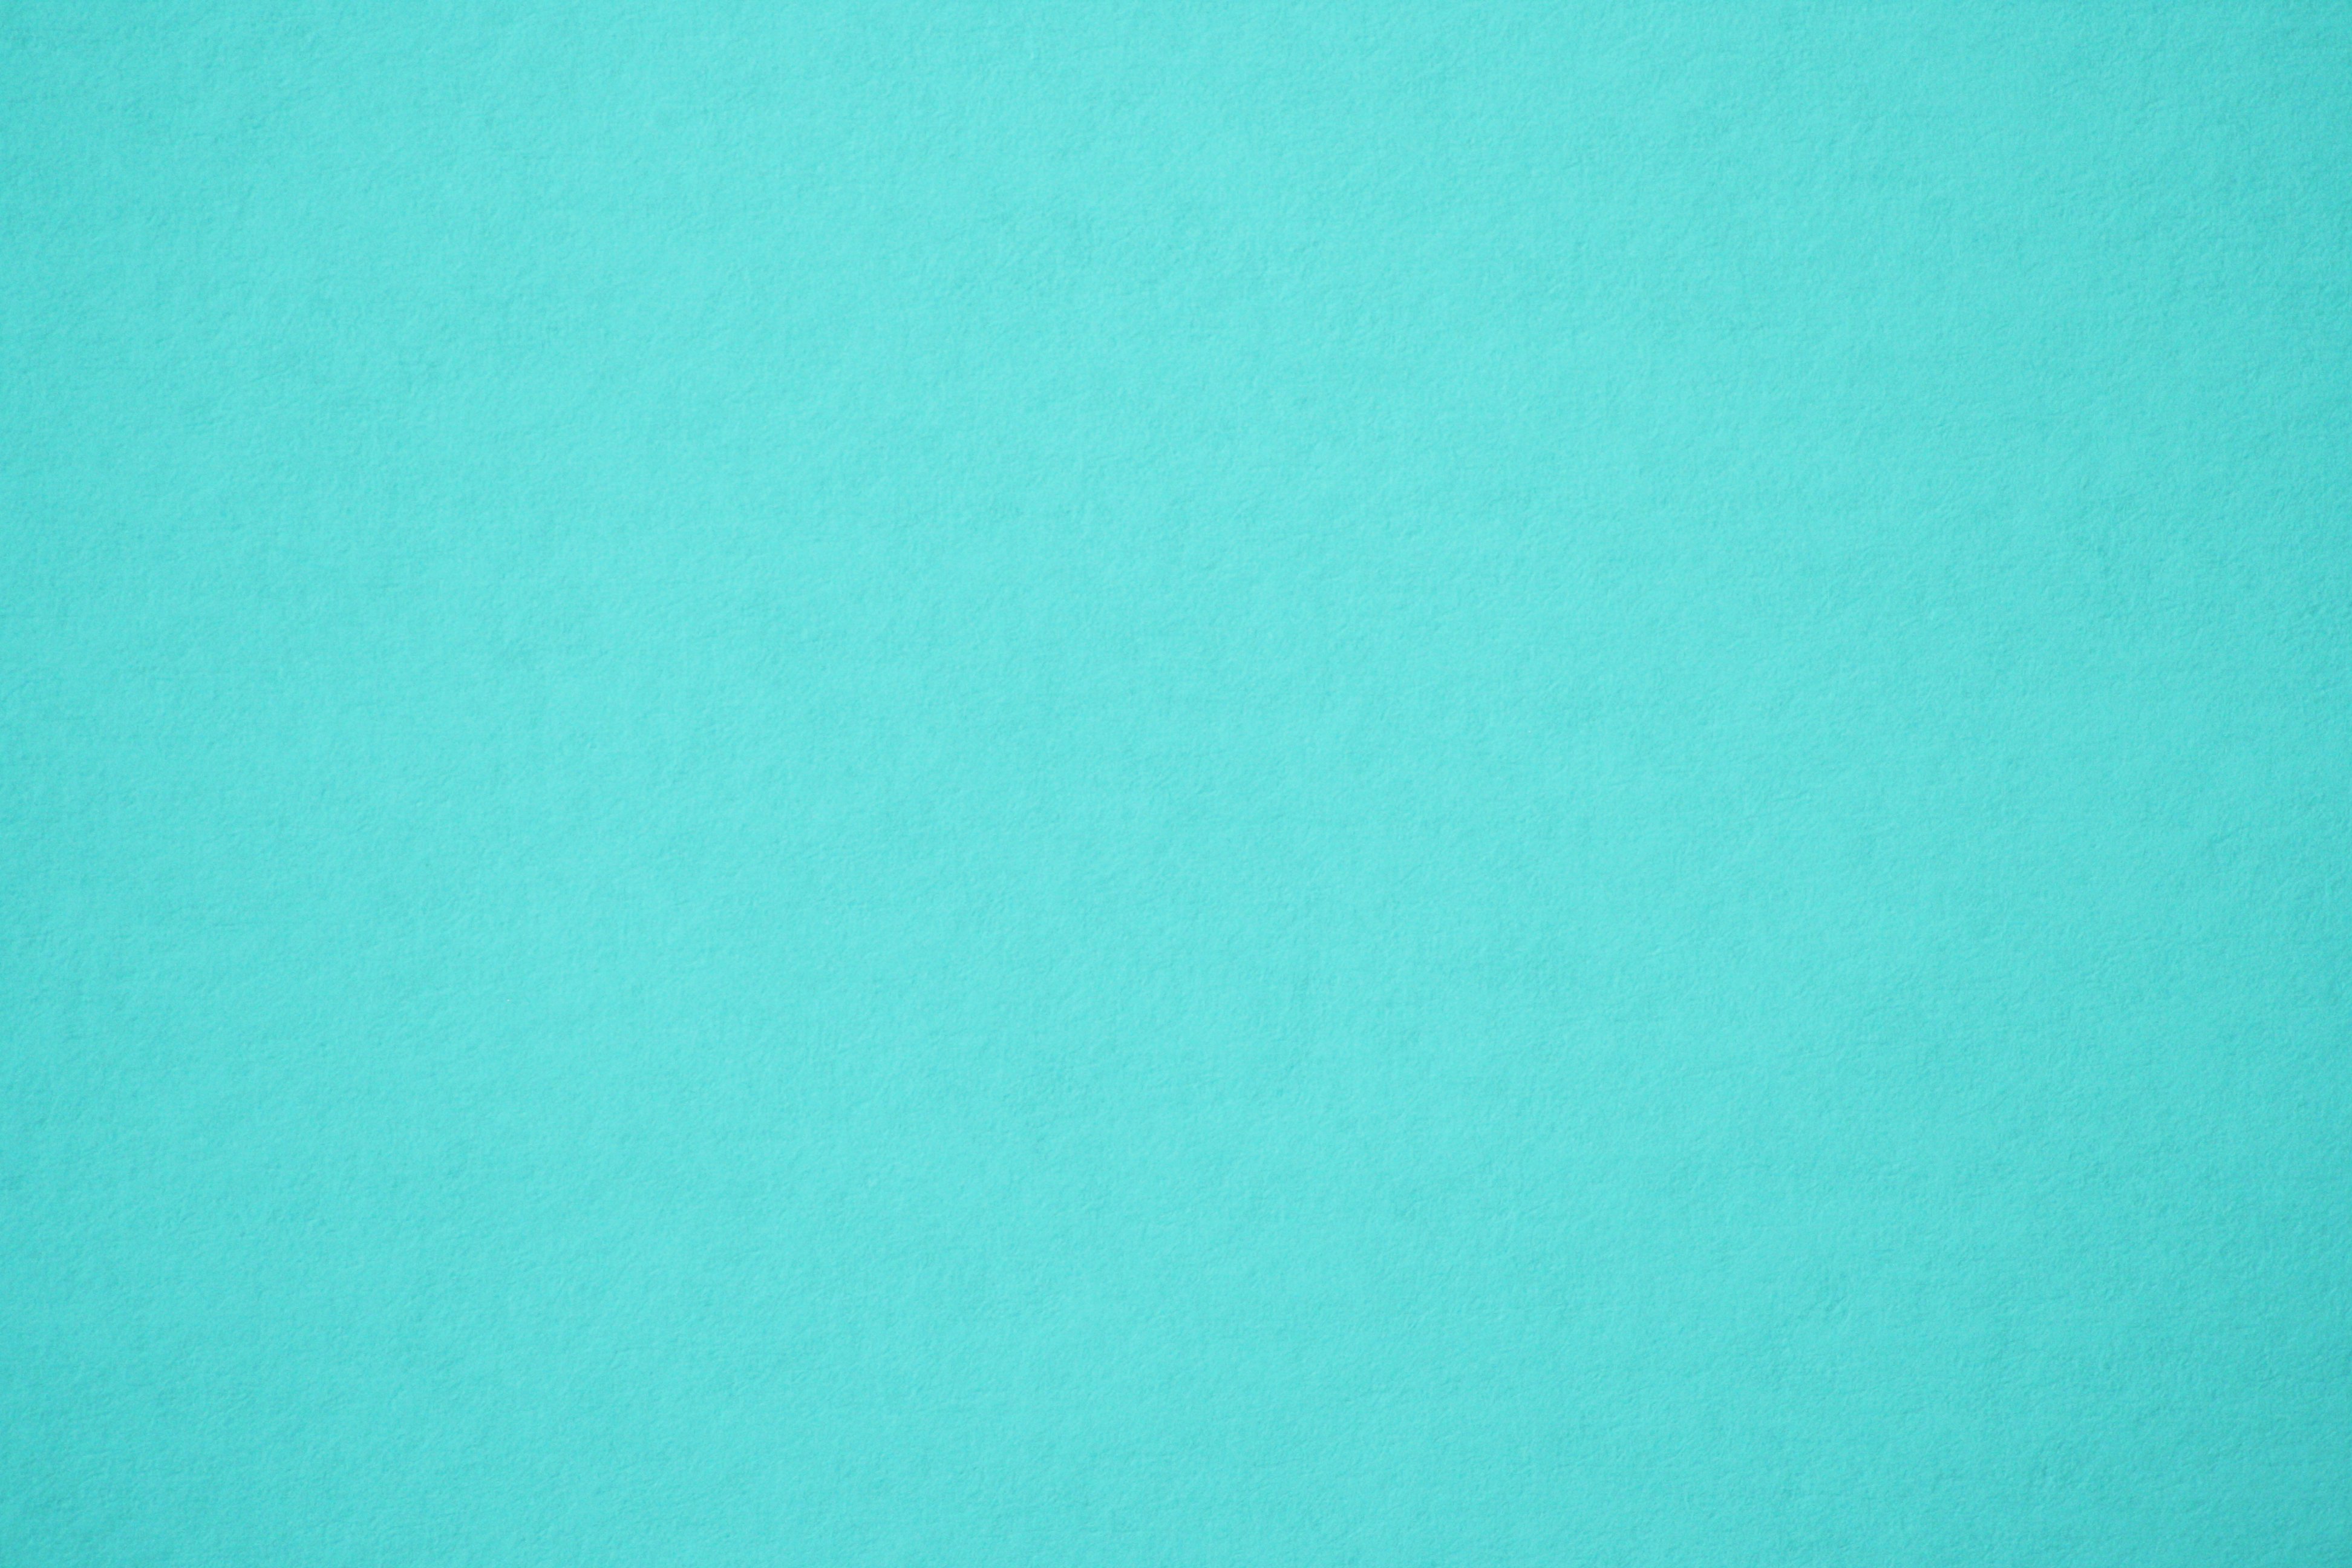 3888x2592 > Turquoise Wallpapers